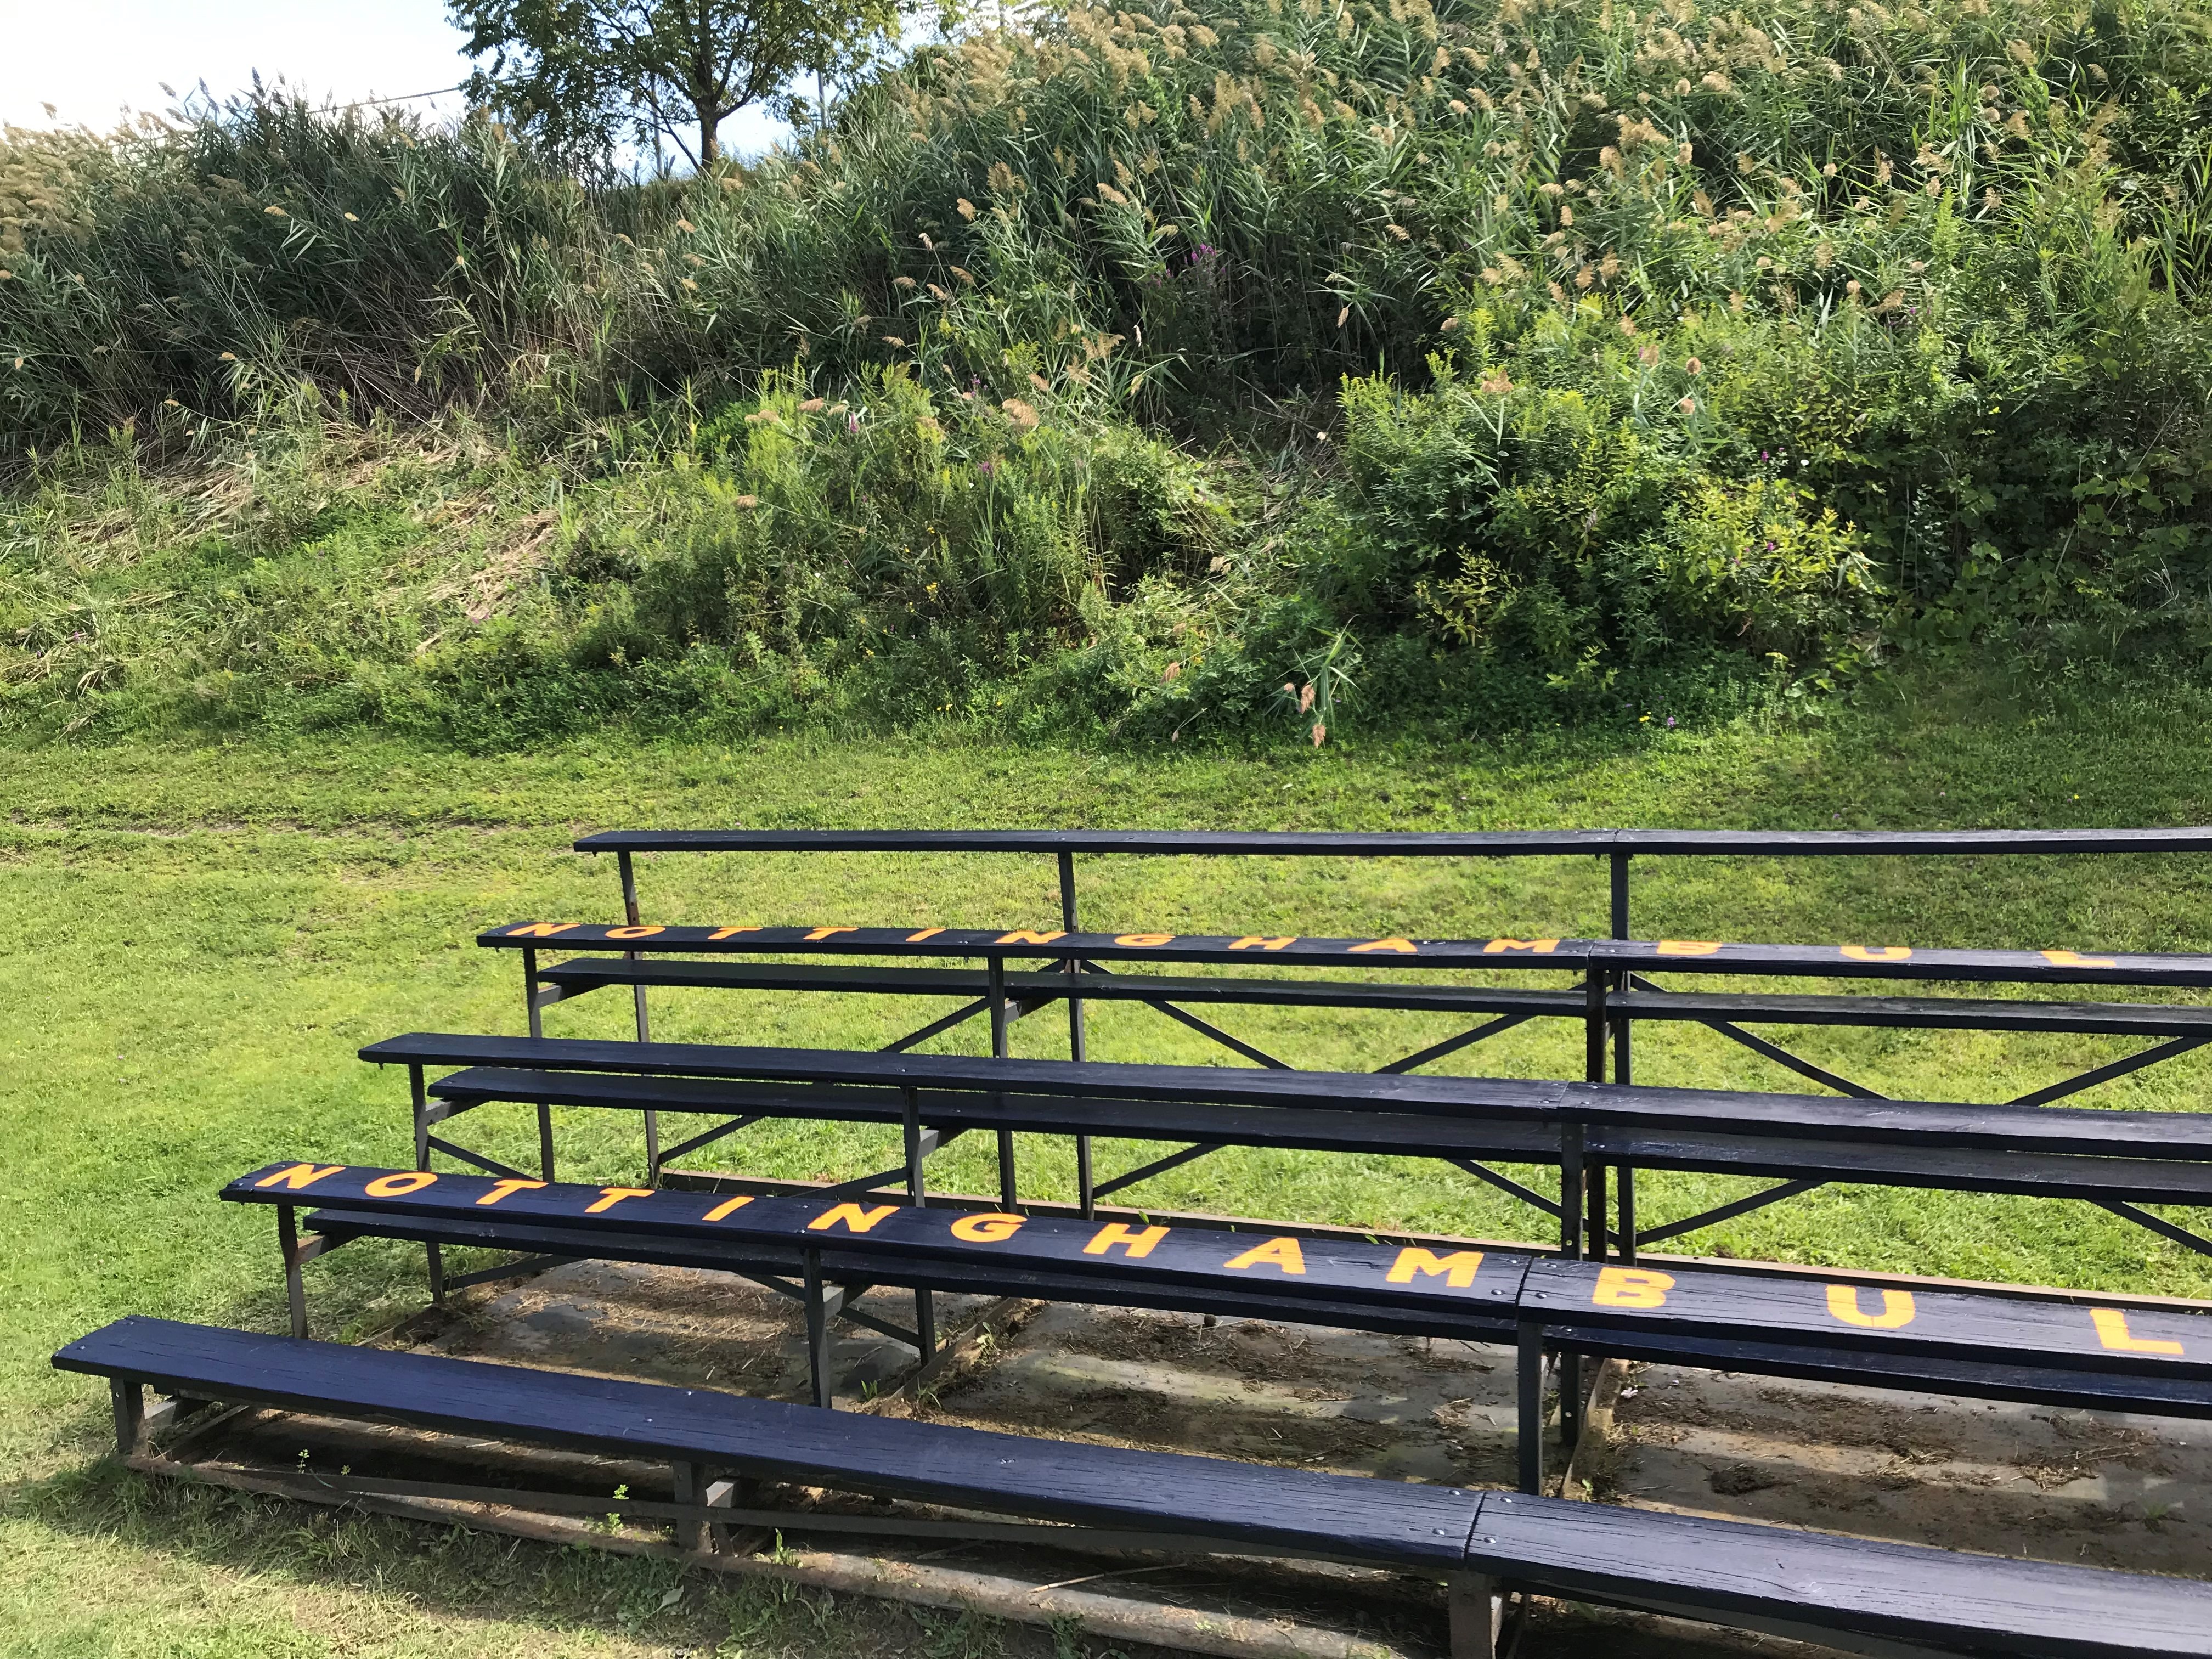 This is a photo of bleachers at Nottingham High School.